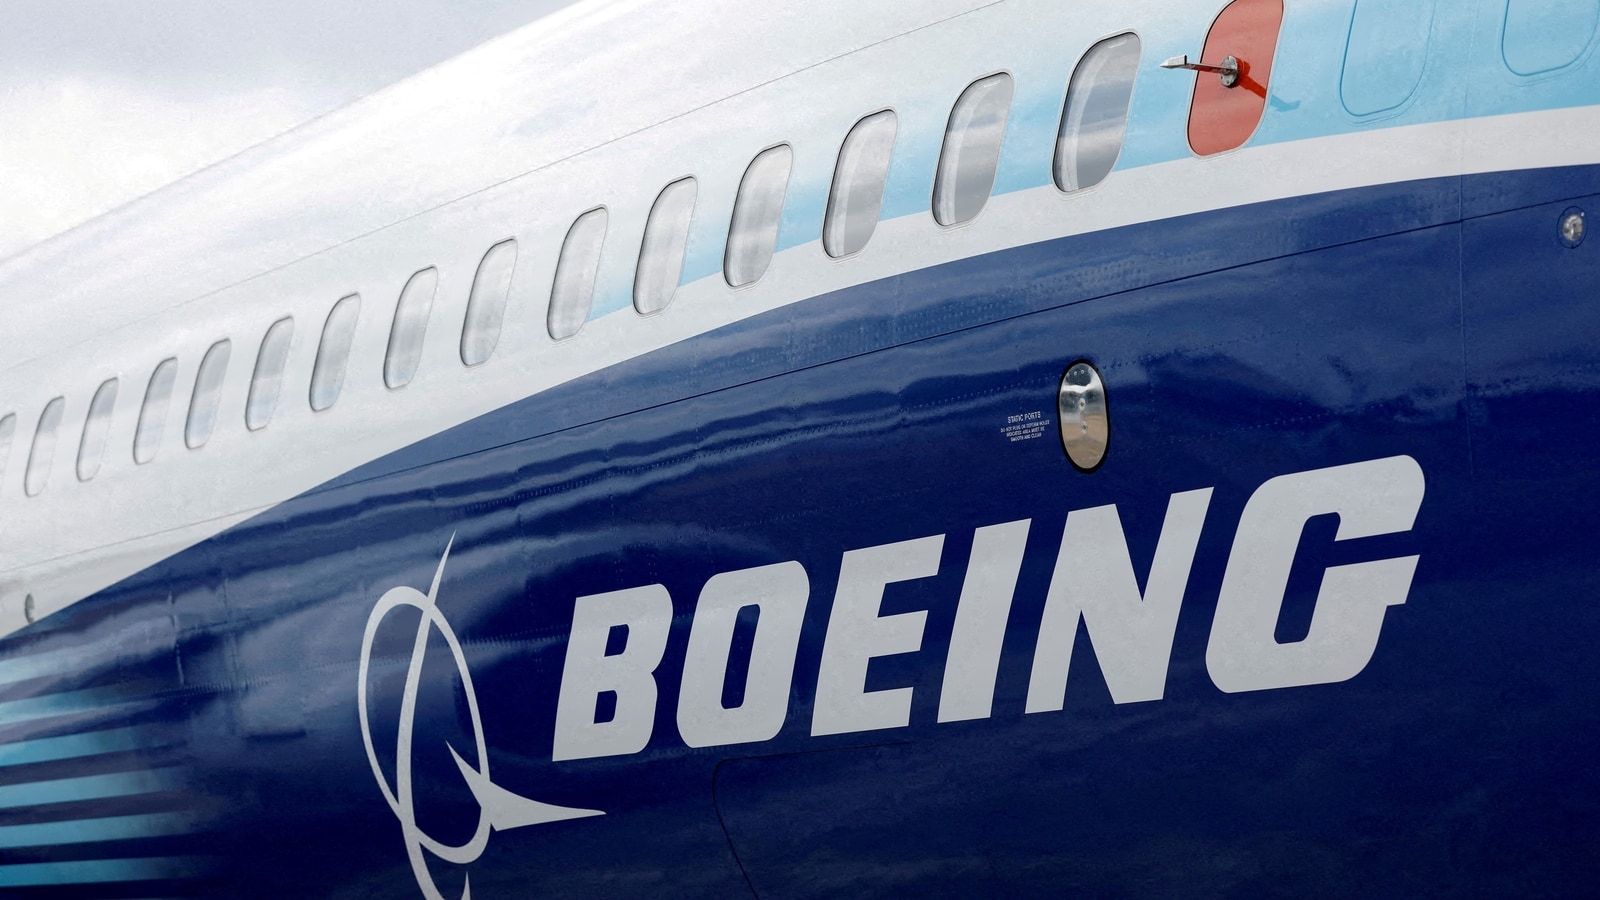 2 more Boeing whistleblowers go public, exposing big secret over plane safety: ‘Ticking Time Bomb’